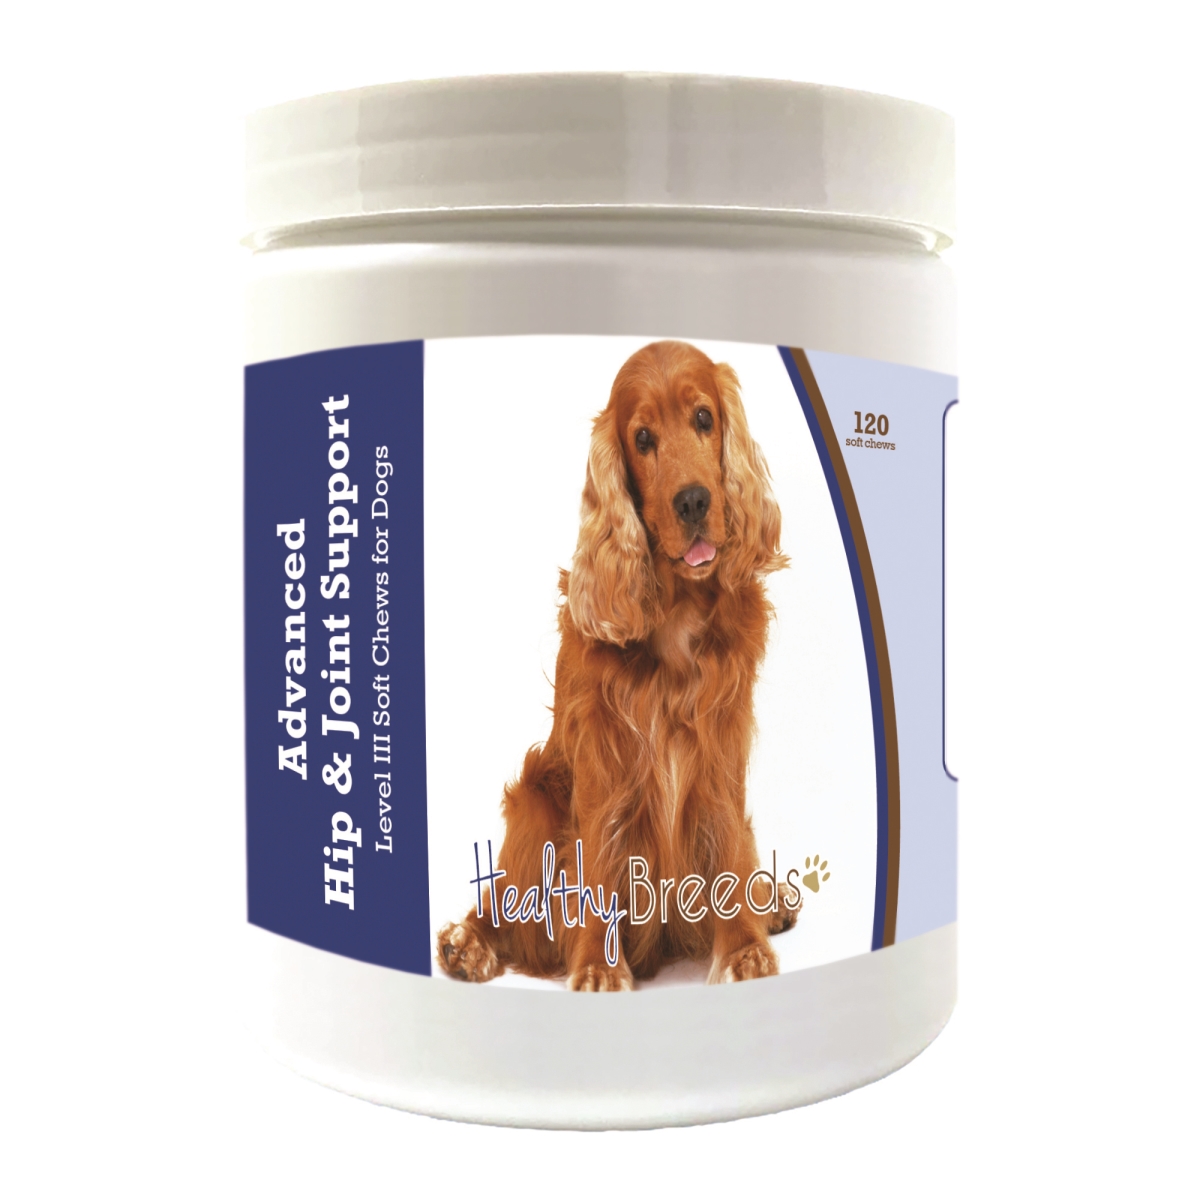 Picture of Healthy Breeds 192959898033 Cocker Spaniel Advanced Hip & Joint Support Level III Soft Chews for Dogs